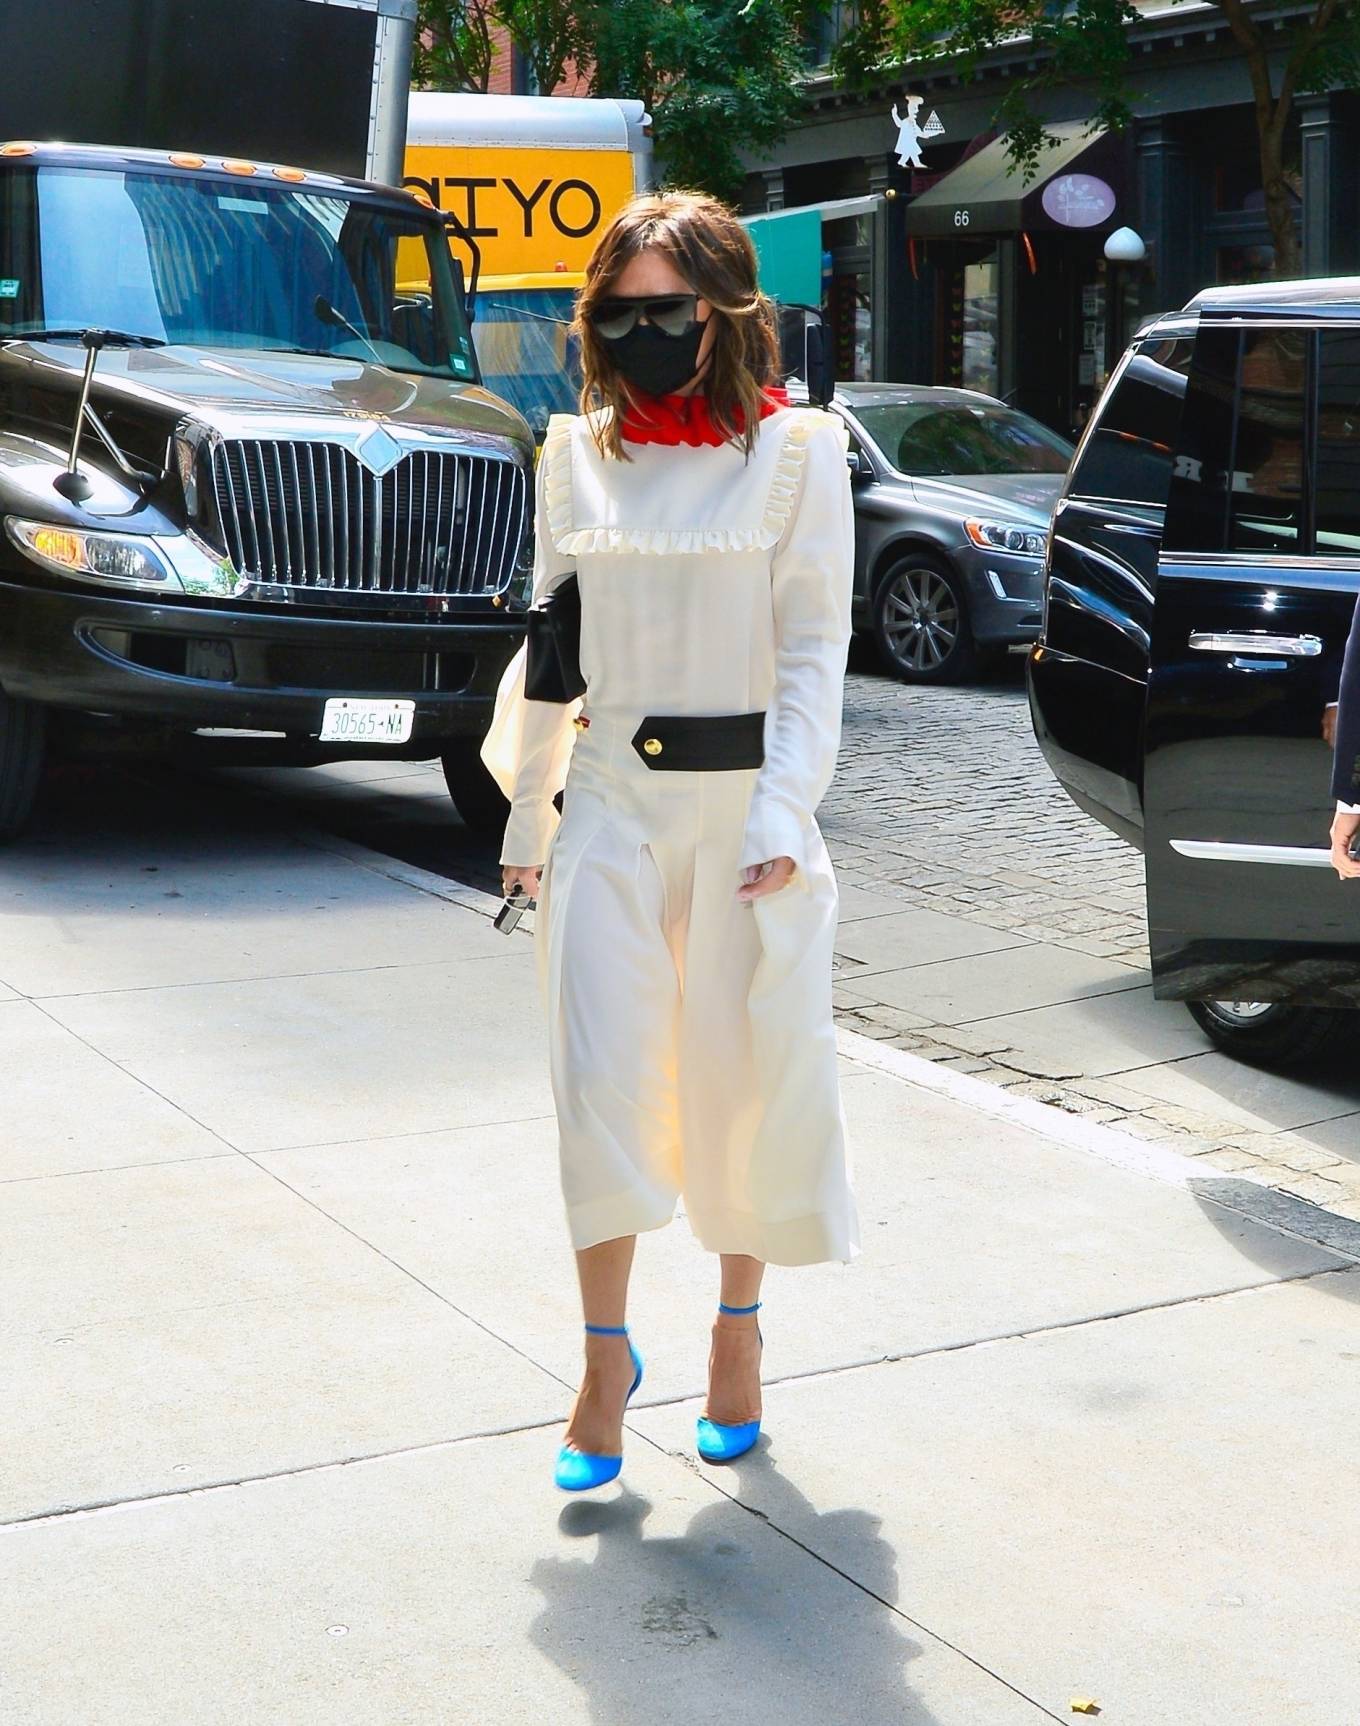 Victoria Beckham 2021 : Victoria Beckham – In white maxi dress steps out in New York-09